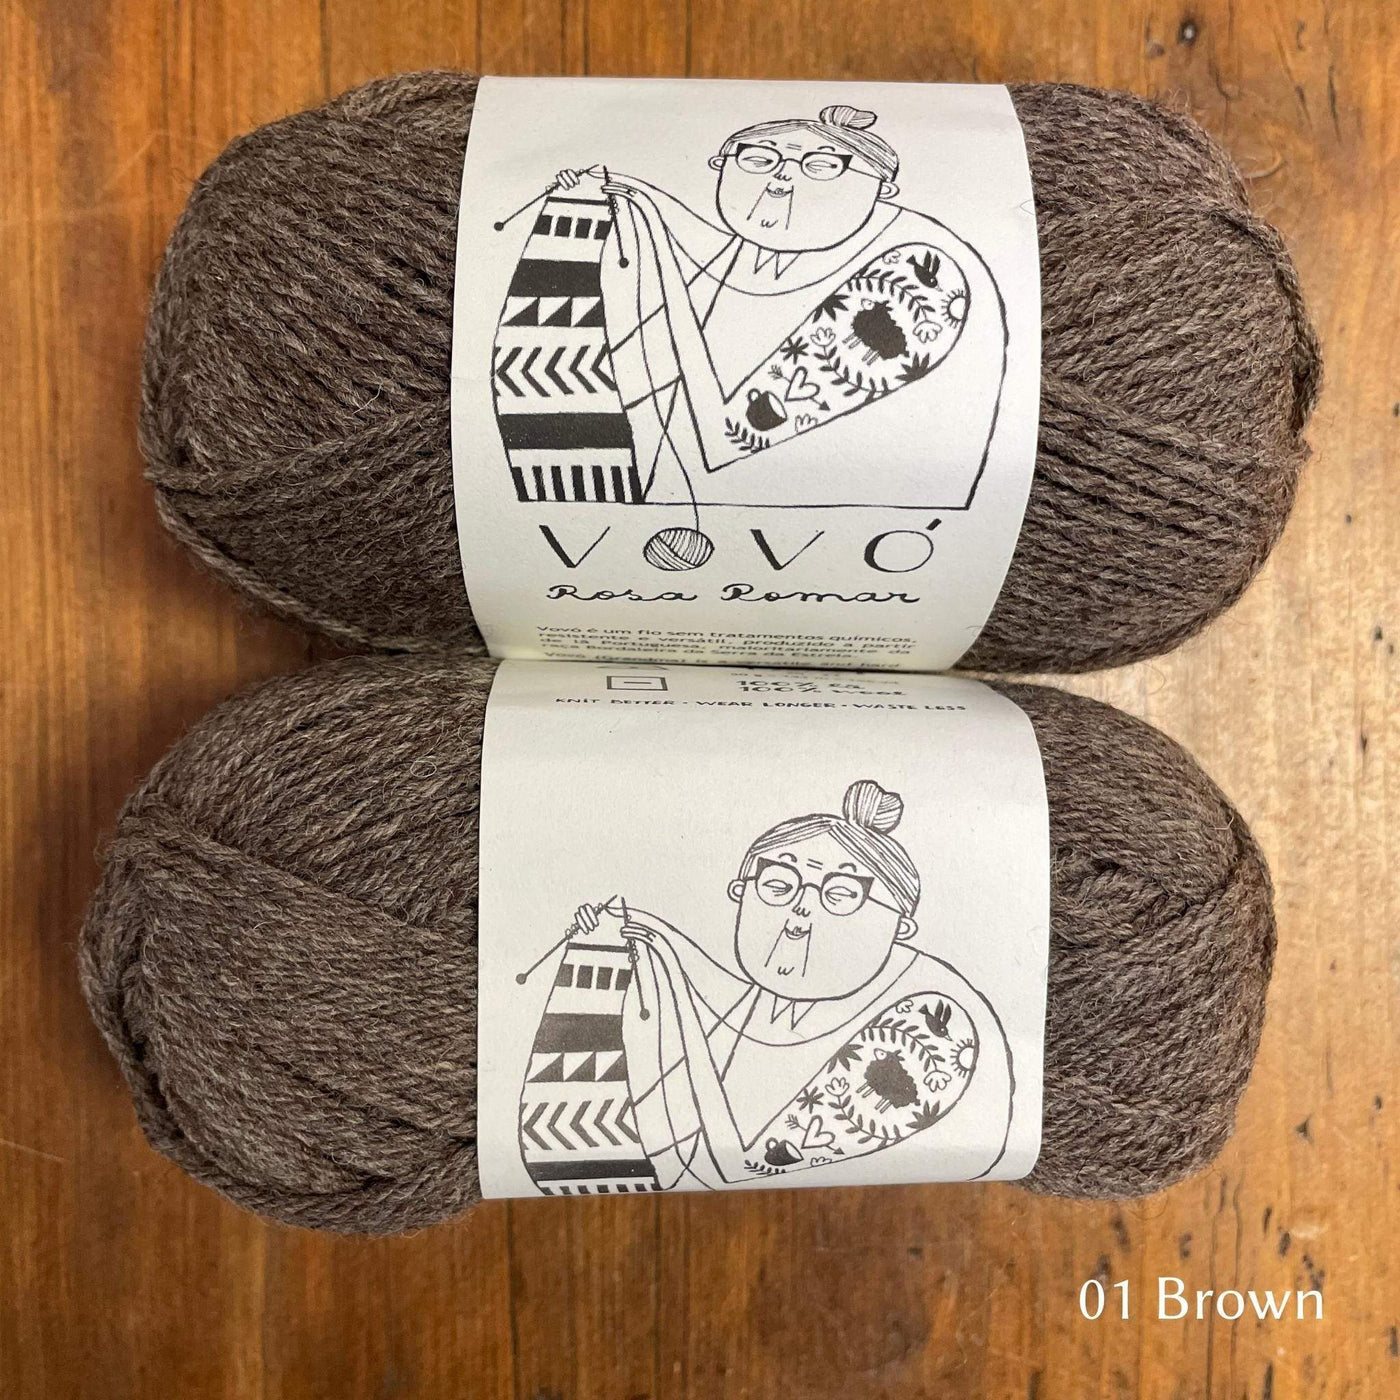 Retrosaria Vovo variant color 01 brown, medium brown, showing label with grandmother knitting